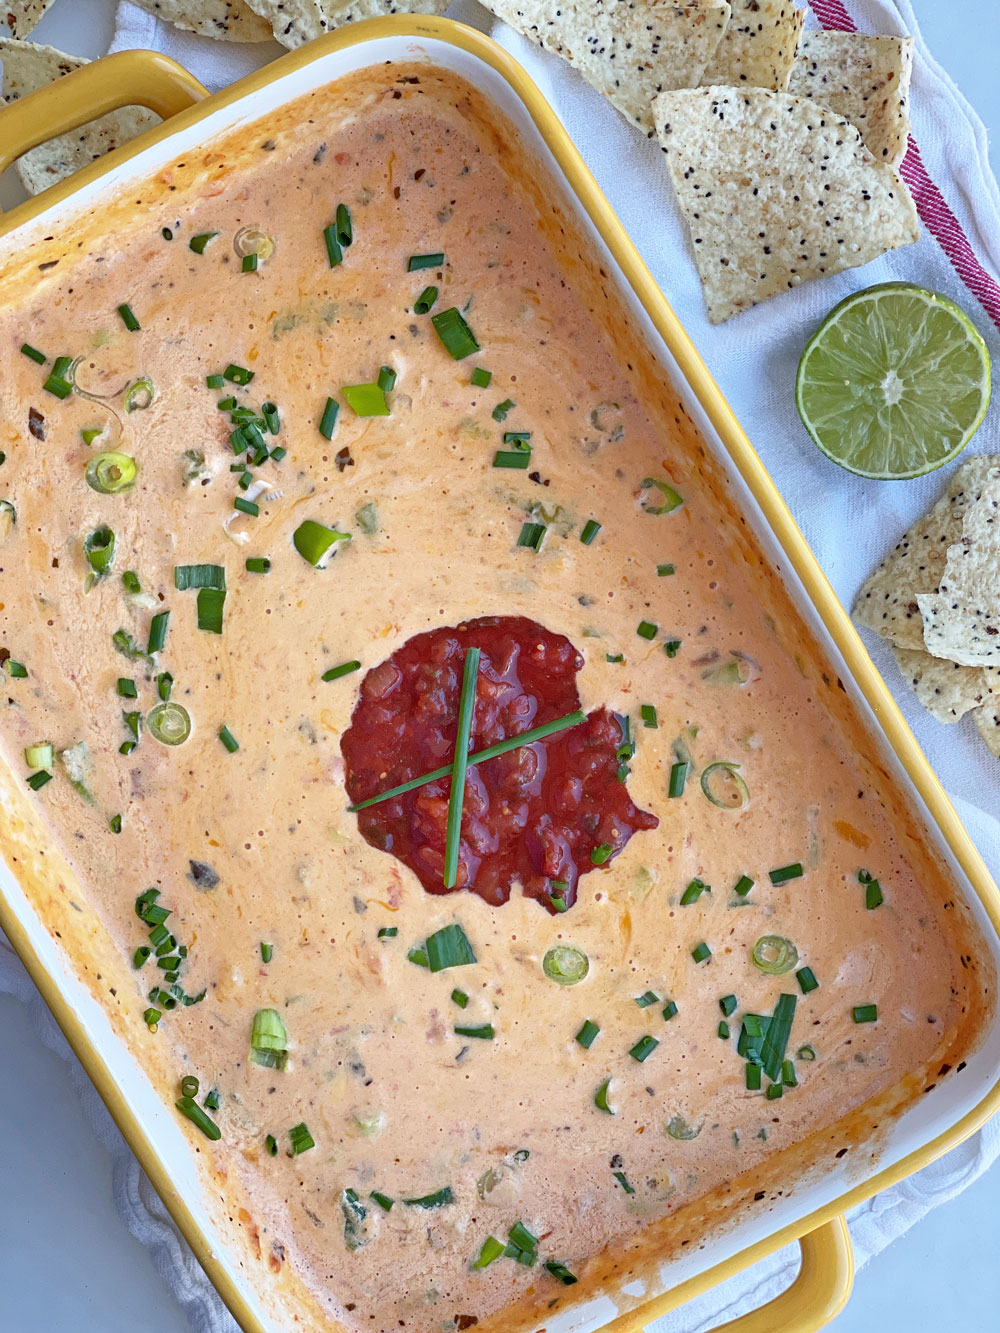 Easy Baked Queso Dip. This easy hack makes cooking easier and less mess. Happy Cooking! www.ChopHappy.com #quesodip #tiktokhack